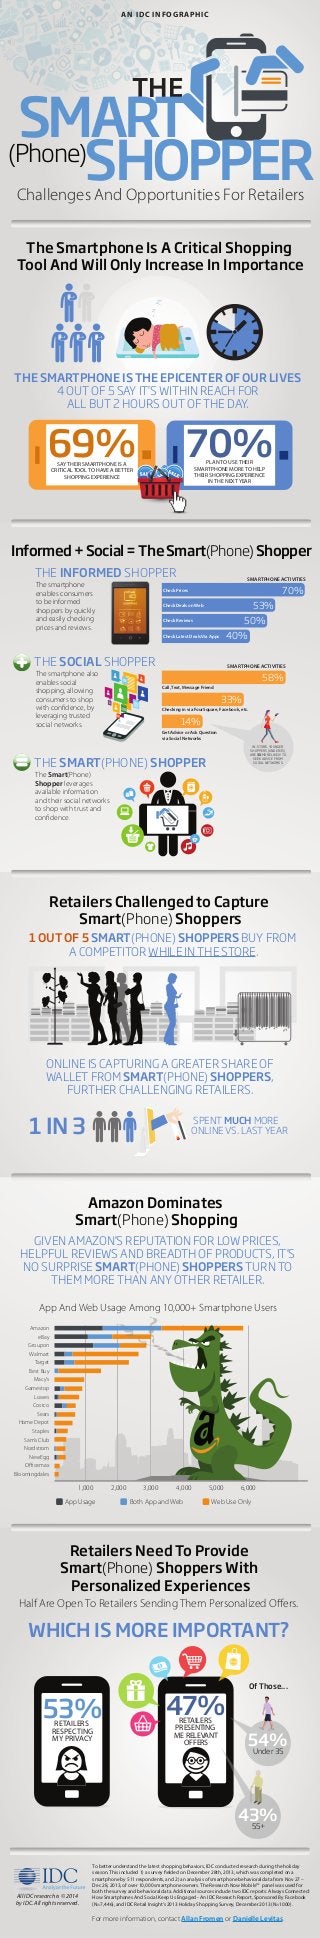 App And Web Usage Among 10,000+ Smartphone Users
1,000 2,000 3,000 4,000 5,000 6,000
Amazon
eBay
Groupon
Walmart
Target
Best Buy
Macy’s
Gamestop
Lowes
Costco
Sears
Home Depot
Staples
Sam’s Club
Nordstrom
NewEgg
Officemax
Bloomingdales
App Usage Both App and Web Web Use Only
THE INFORMED SHOPPER
The Smartphone Is A Critical Shopping
Tool And Will Only Increase In Importance
Informed+Social=TheSmart(Phone)Shopper
THE SMARTPHONE IS THE EPICENTER OF OUR LIVES
4 OUT OF 5 SAY IT’S WITHIN REACH FOR
ALL BUT 2 HOURS OUT OF THE DAY.
THE SOCIAL SHOPPER
1 OUT OF 5 SMART(PHONE) SHOPPERS BUY FROM
A COMPETITOR WHILE IN THE STORE.
Half Are Open To Retailers Sending Them Personalized Offers.
69%SAY THEIR SMARTPHONE IS A
CRITICAL TOOL TO HAVE A BETTER
SHOPPING EXPERIENCE
70%PLAN TO USE THEIR
SMARTPHONE MORE TO HELP
THEIR SHOPPING EXPERIENCE
IN THE NEXT YEAR
SMARTPHONE ACTIVITIES
AN IDC INFOGRAPHIC
Retailers Challenged to Capture
Smart(Phone) Shoppers
Amazon Dominates
Smart(Phone) Shopping
Retailers Need To Provide
Smart(Phone) Shoppers With
Personalized Experiences
WHICH IS MORE IMPORTANT?
The smartphone
enables consumers
to be informed
shoppers by quickly
and easily checking
prices and reviews.
The smartphone also
enables social
shopping, allowing
consumers to shop
with confidence, by
leveraging trusted
social networks.
Check Prices
Check Deals on Web
Check Reviews
Check Latest Deals Via Apps
Call, Text, Message Friend
Get Advice or Ask Question
via Social Networks
70%
53%
50%
40%
58%
Checking in via FourSquare, Facebook, etc.
33%
14%
ONLINE IS CAPTURING A GREATER SHARE OF
WALLET FROM SMART(PHONE) SHOPPERS,
FURTHER CHALLENGING RETAILERS.
Challenges And Opportunities For Retailers
(Phone)
THE
53%RETAILERS
RESPECTING
MY PRIVACY
47%RETAILERS
PRESENTING
ME RELEVANT
OFFERS
Of Those...
SPENT MUCH MORE
ONLINE VS. LAST YEAR1 IN 3
GIVEN AMAZON’S REPUTATION FOR LOW PRICES,
HELPFUL REVIEWS AND BREADTH OF PRODUCTS, IT’S
NO SURPRISE SMART(PHONE) SHOPPERS TURN TO
THEM MORE THAN ANY OTHER RETAILER.
SMARTPHONE ACTIVITIES
Under 35
54%
THE SMART(PHONE) SHOPPER
The Smart(Phone)
Shopper leverages
available information
and their social networks
to shop with trust and
confidence.
SMART
SHOPPER
To better understand the latest shopping behaviors, IDC conducted research during the holiday
season. This included 1) a survey fielded on December 28th, 2013, which was completed on a
smartphone by 511 respondents, and 2) an analysis of smartphone behavioral data from Nov 27 –
Dec 28, 2013, of over 10,000 smartphone owners. The Research Now Mobile™ panel was used for
both the survey and behavioral data. Additional sources include two IDC reports: Always Connected:
How Smartphones And Social Keep Us Engaged - An IDC Research Report, Sponsored By Facebook
(N=7,446), and IDC Retail Insight's 2013 Holiday Shopping Survey, December 2013 (N=1000).
For more information, contact Allan Fromen or Danielle Levitas.
All IDC research is © 2014
by IDC. All rights reserved.  
IN-STORE, YOUNGER
SHOPPERS (UNDER 35)
ARE 3X MORE LIKELY TO
SEEK ADVICE FROM
SOCIAL NETWORKS.
43%55+
 